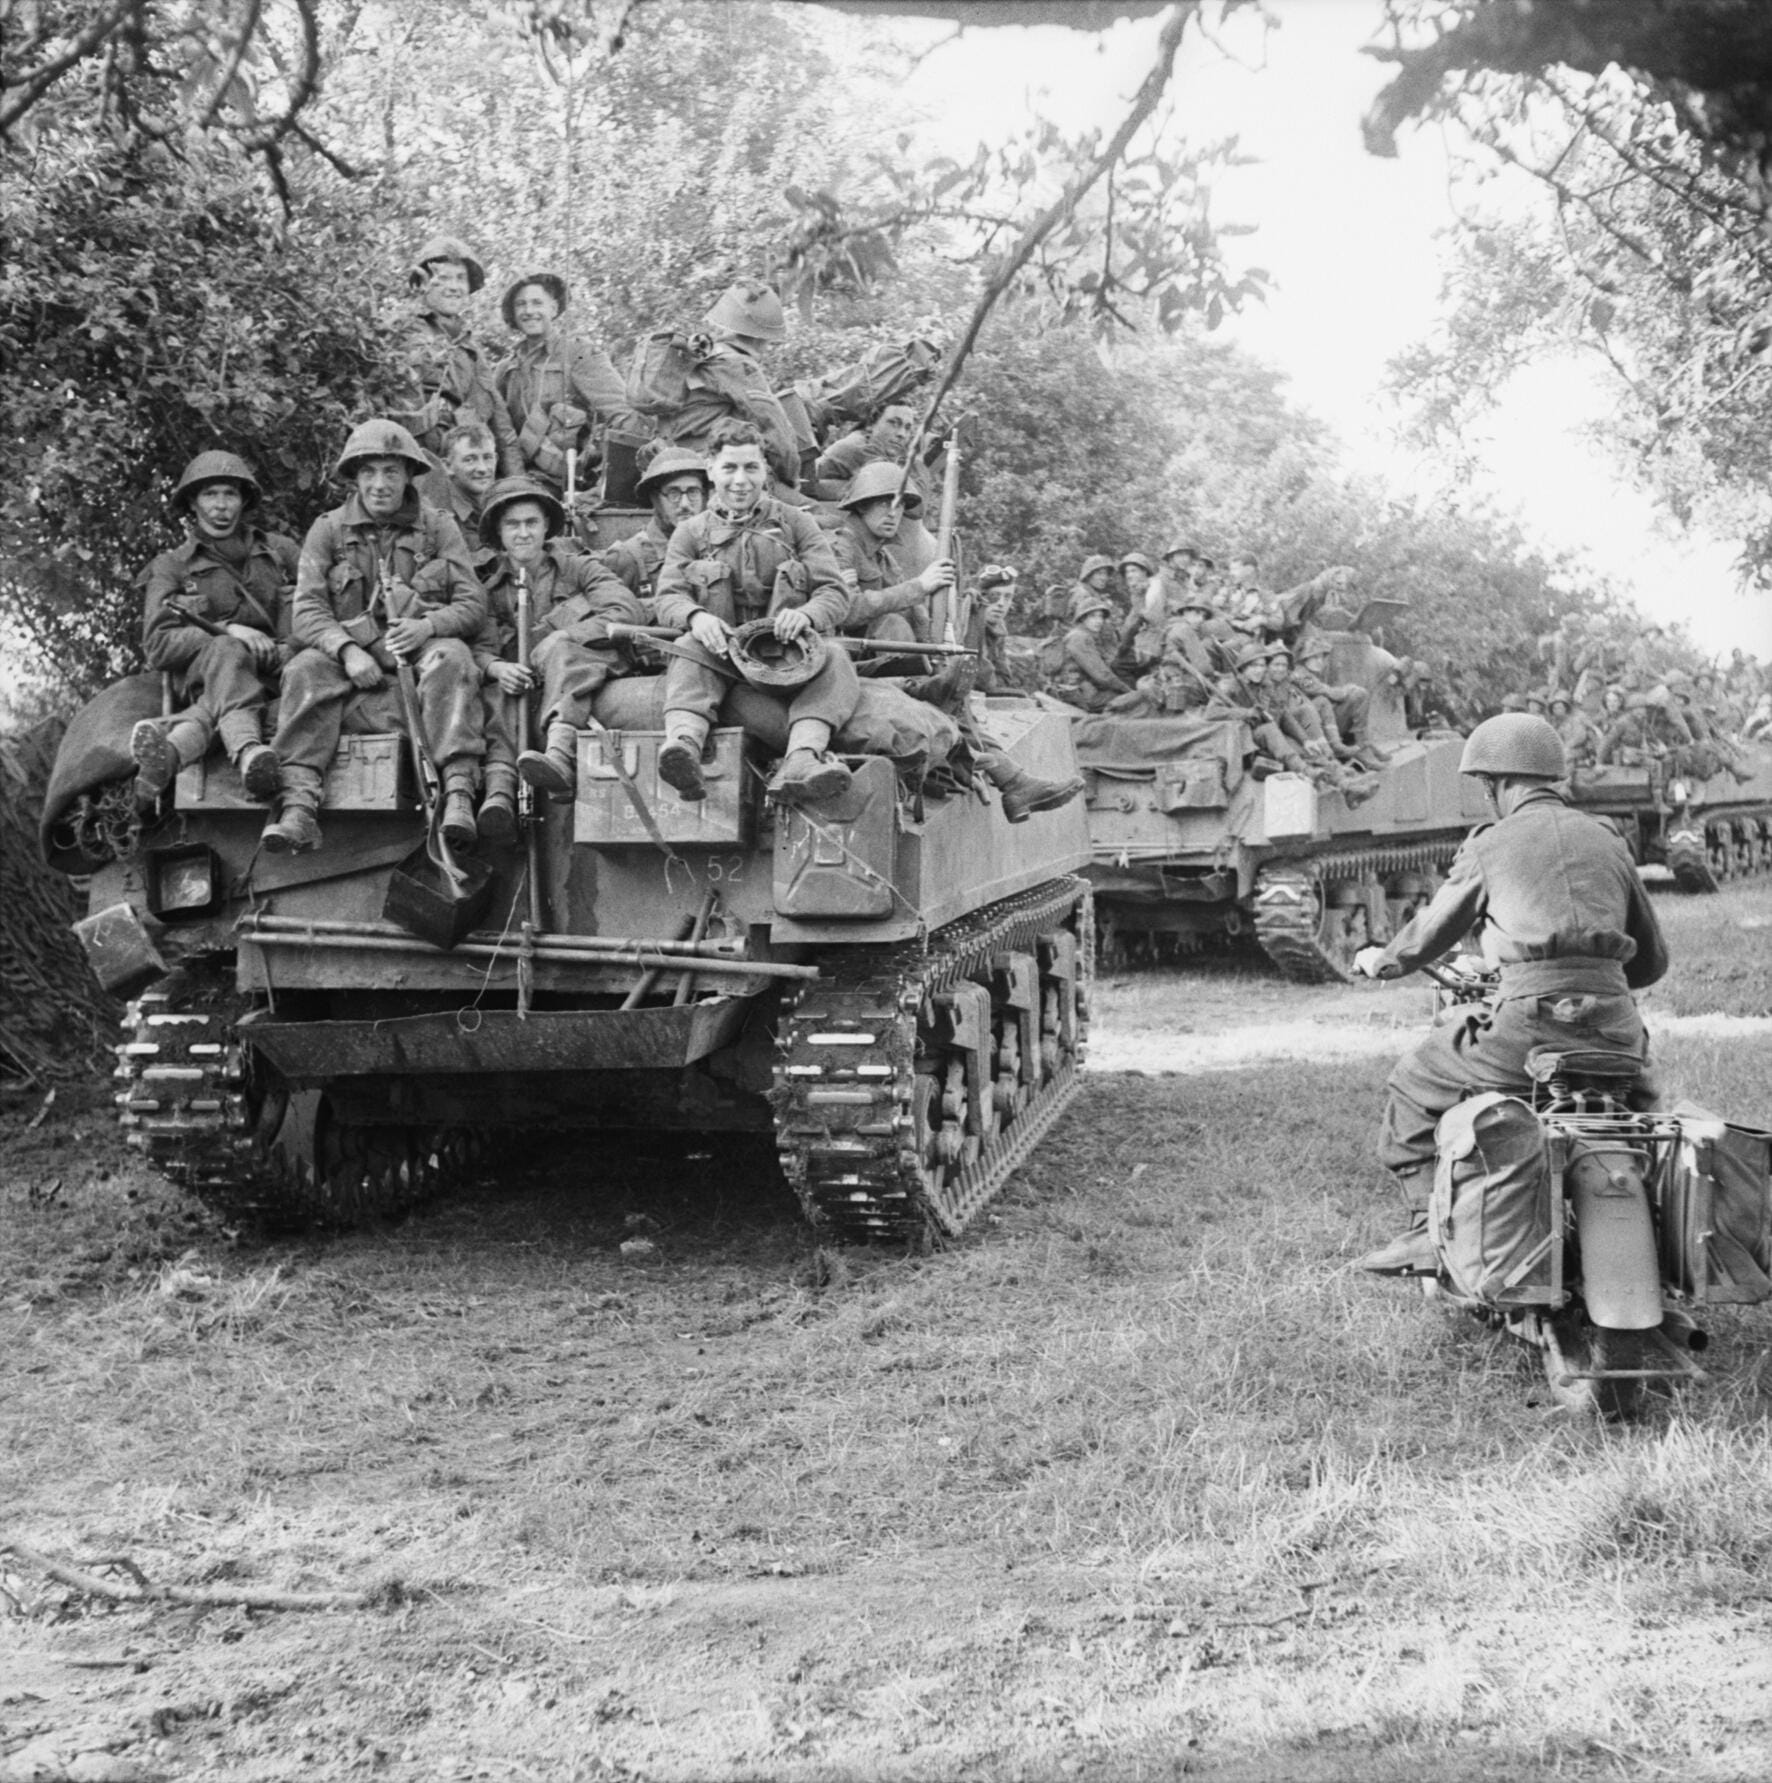 80 Years On - The Staffordshire Yeomanry's Crucial Role in the D-Day Landings at Normandy